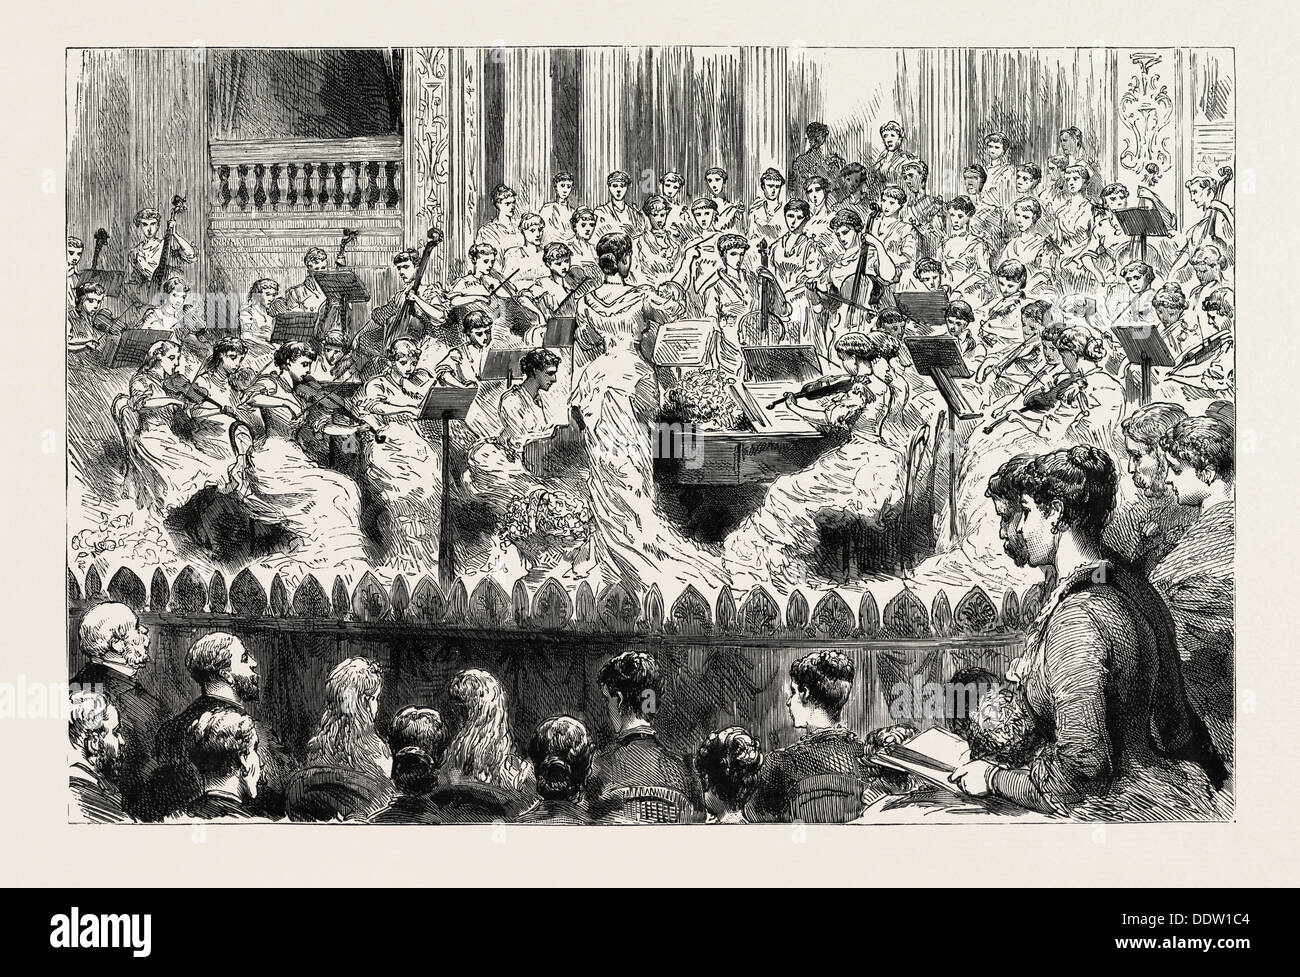 CONCERT BY VISCOUNTESS FOLKESTONE'S LADIES ORCHESTRA AT THE PRINCE'S HALL, PICCADILLY, engraving 1884, LONDON, UK, britain Stock Photo